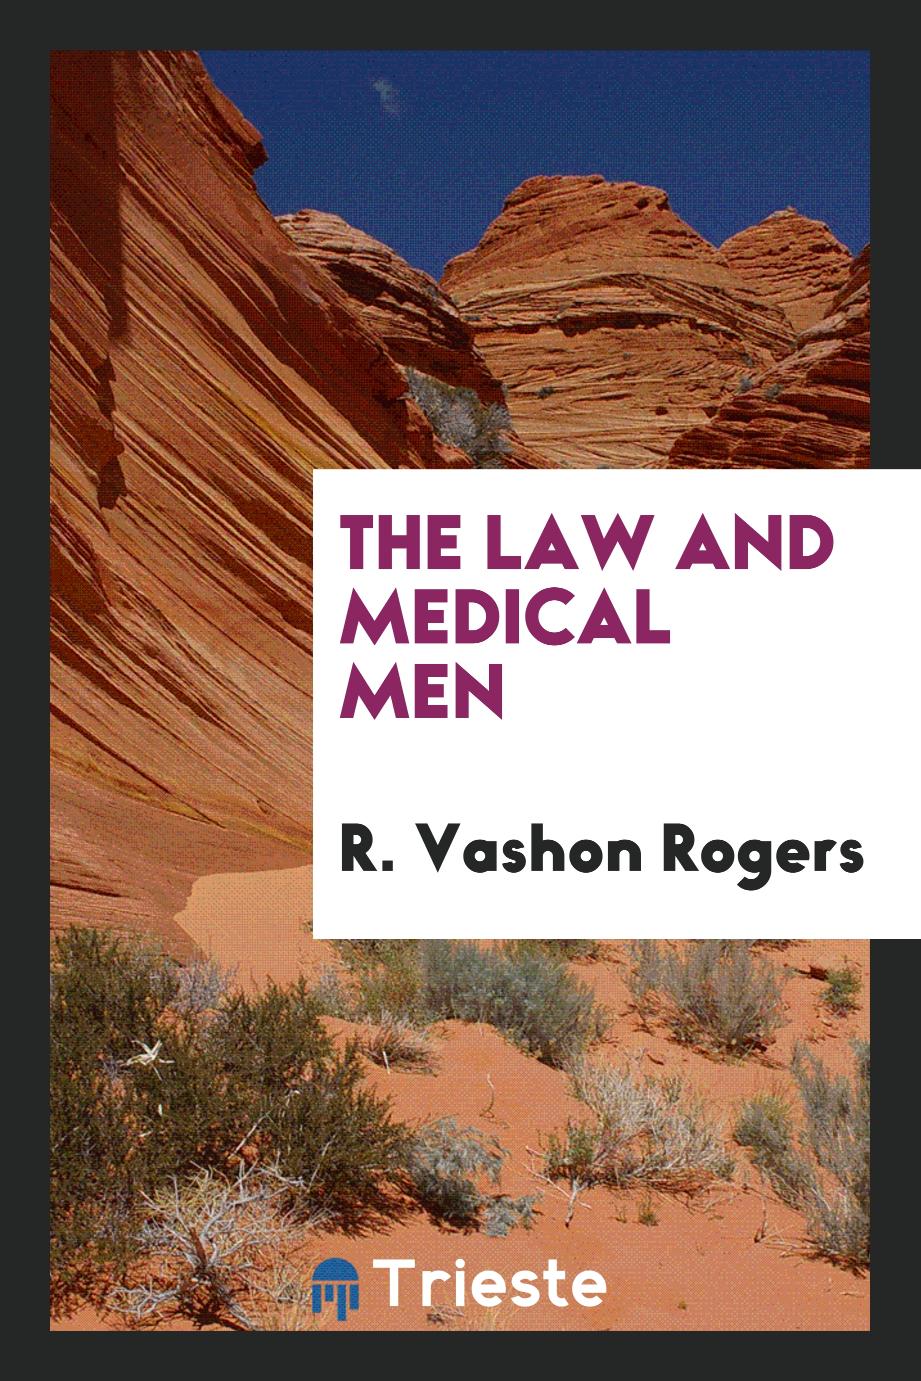 The law and medical men